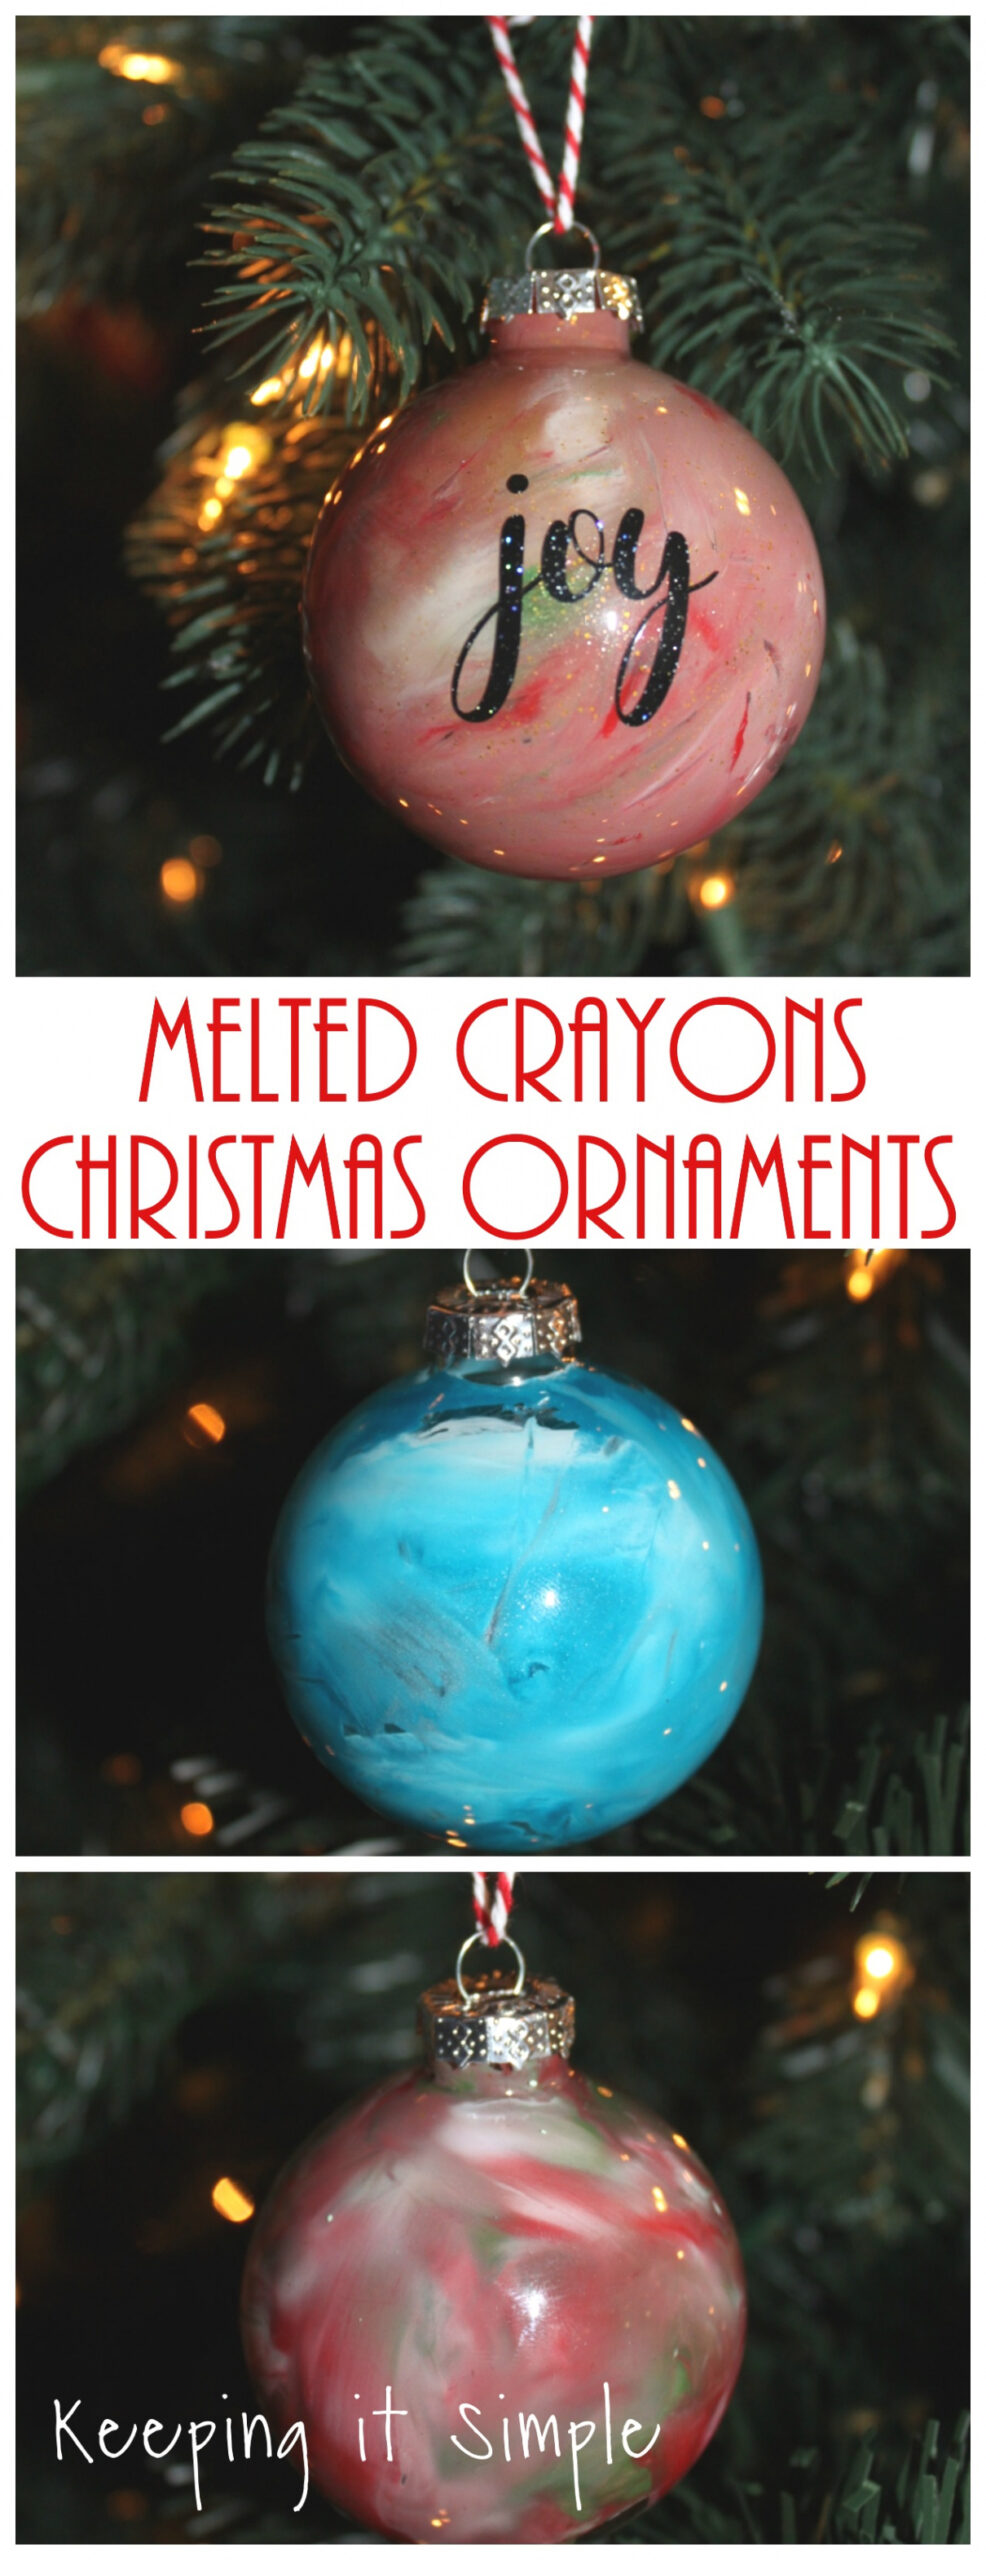 Homemade Christmas Ornaments- Melted Crayon Ornaments - Keeping it